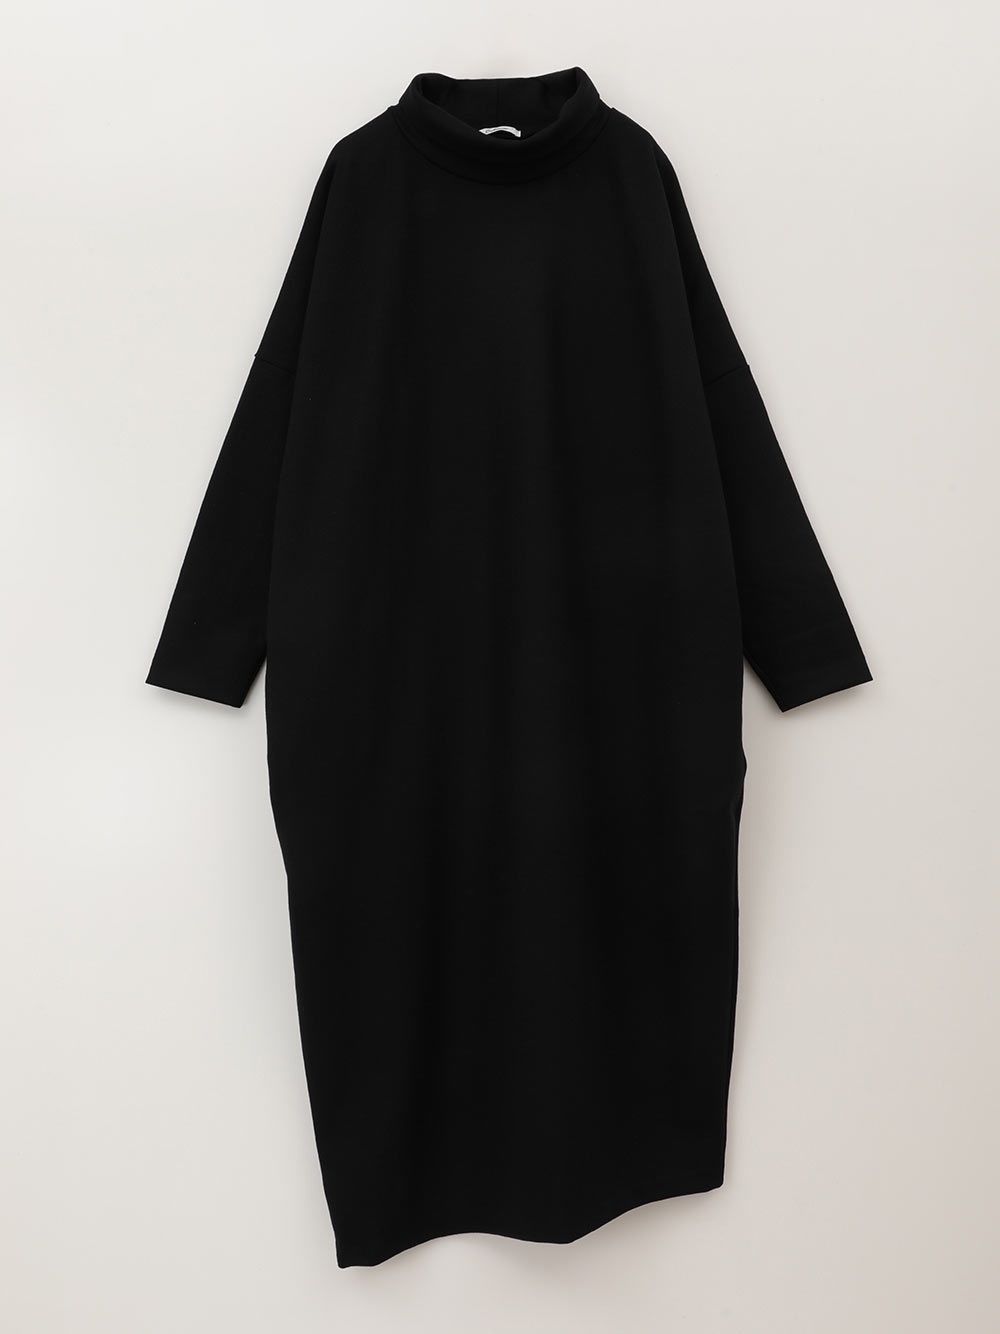 Compressed Wool Dress | Onepiece | Enchainement Online Store